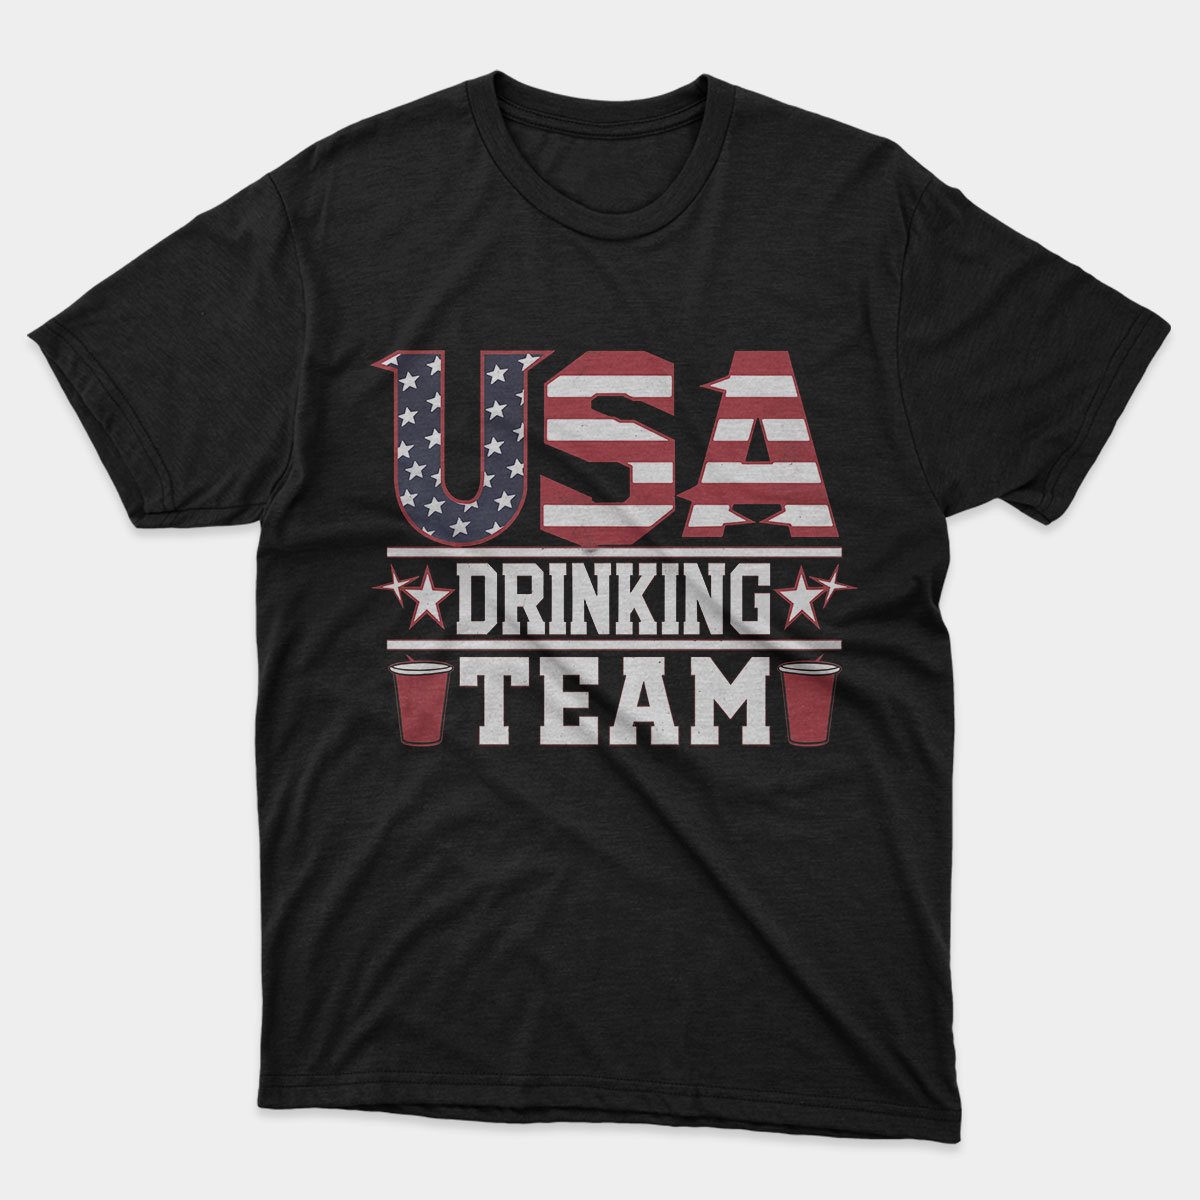 USA Drinking Team Funny Beer T-Shirt